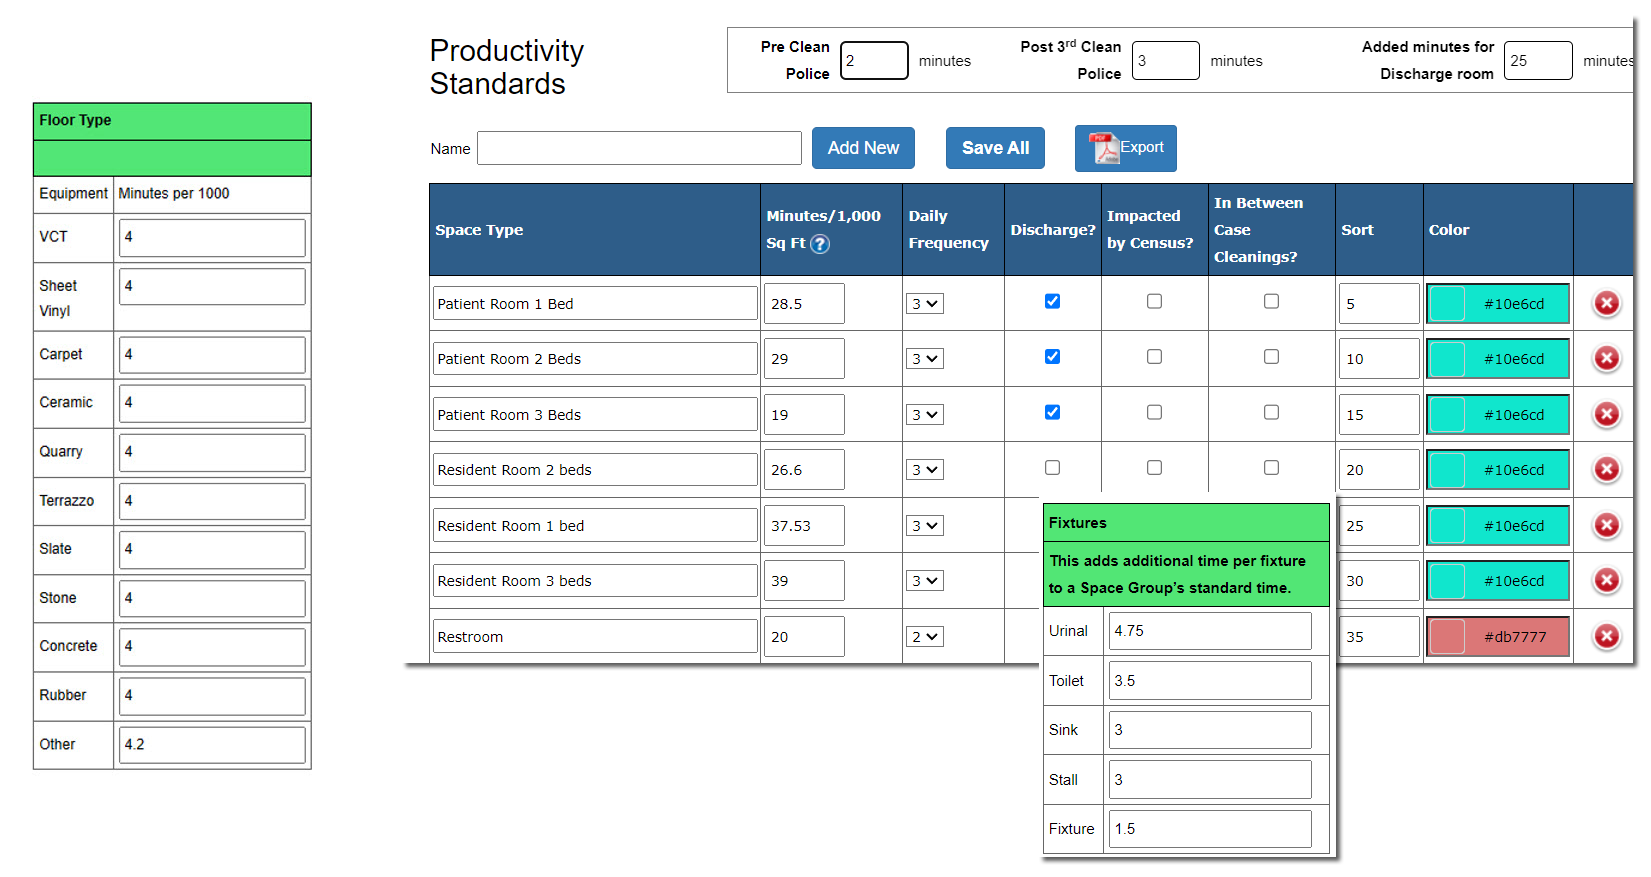 Productivity Standards to standardize your clean times by floor type, space type and tasks